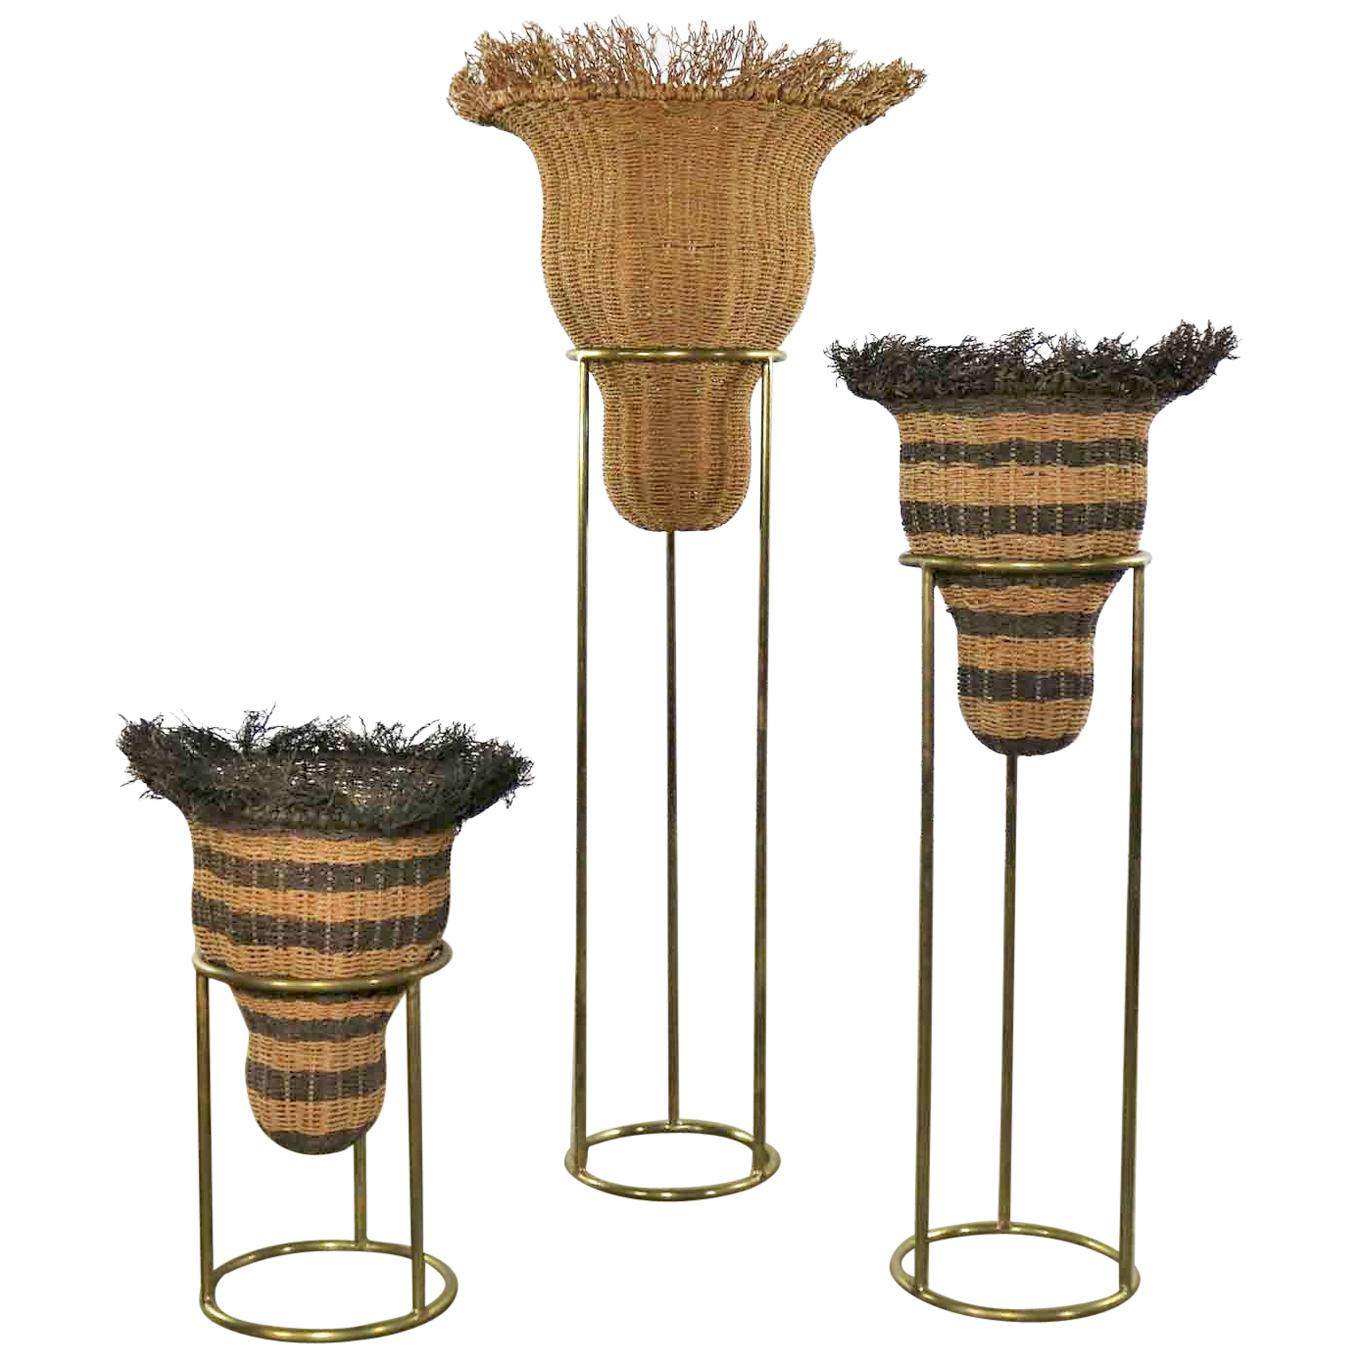 Round Brass Stands with Extra Large Basket Inserts for Plants, Flowers Set of 3